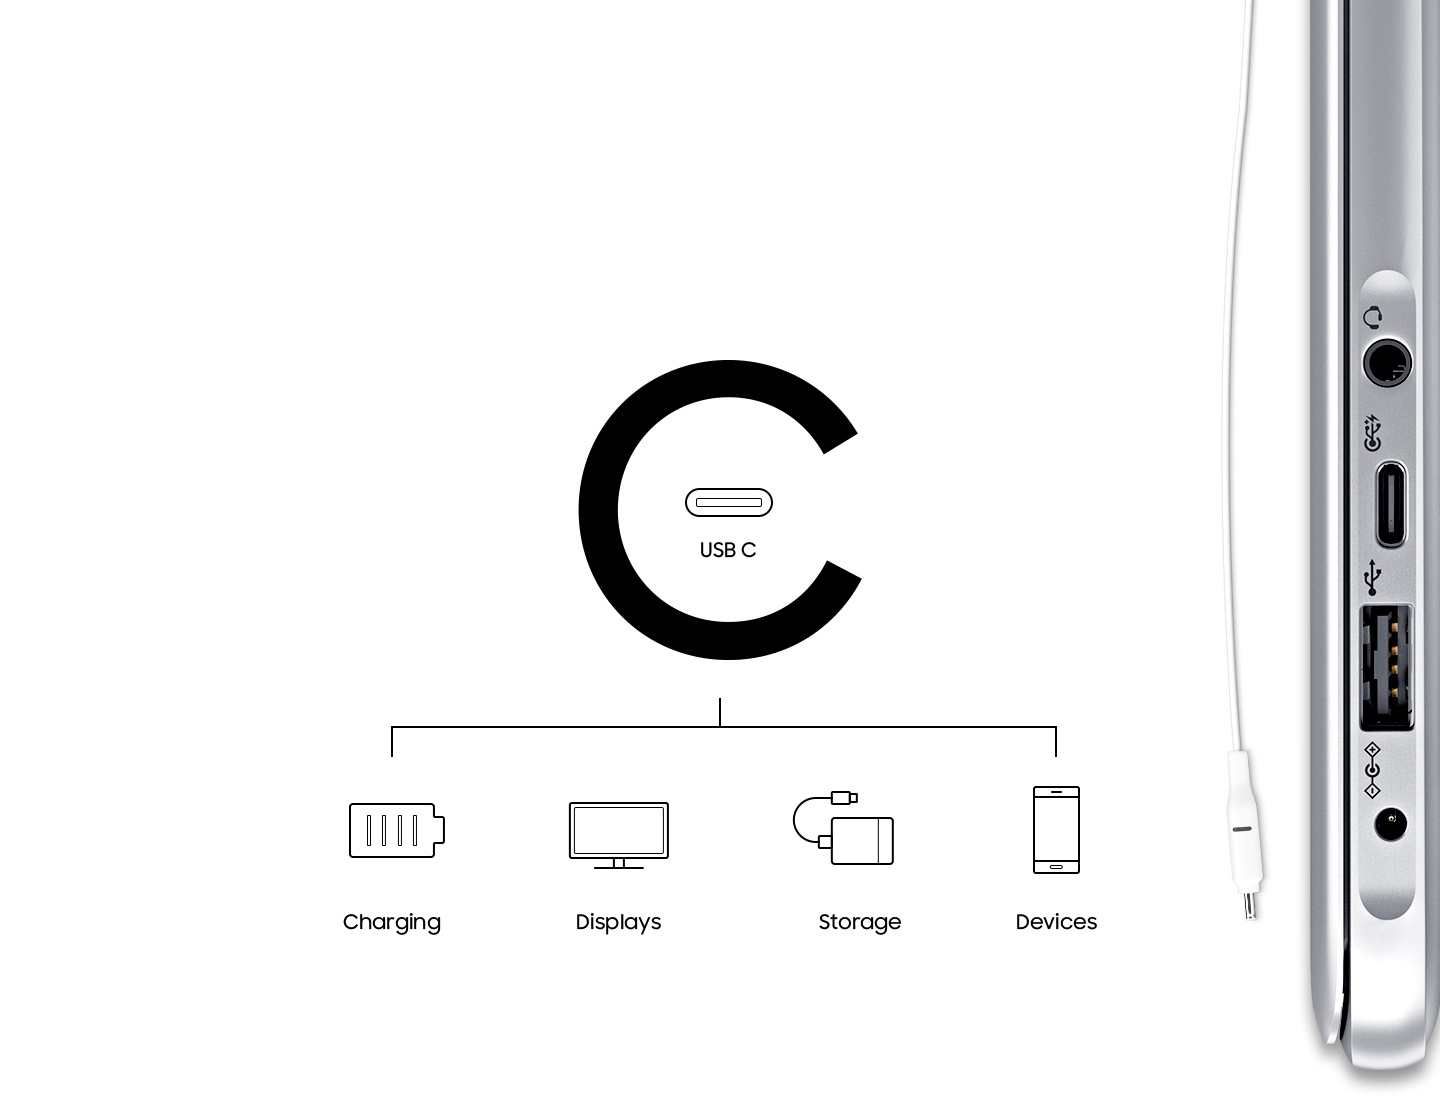 An image showing a charging cable and the Notebook 9’s side with its various ports, including the USB C port, charging, displays, storage, devices icons and texts.